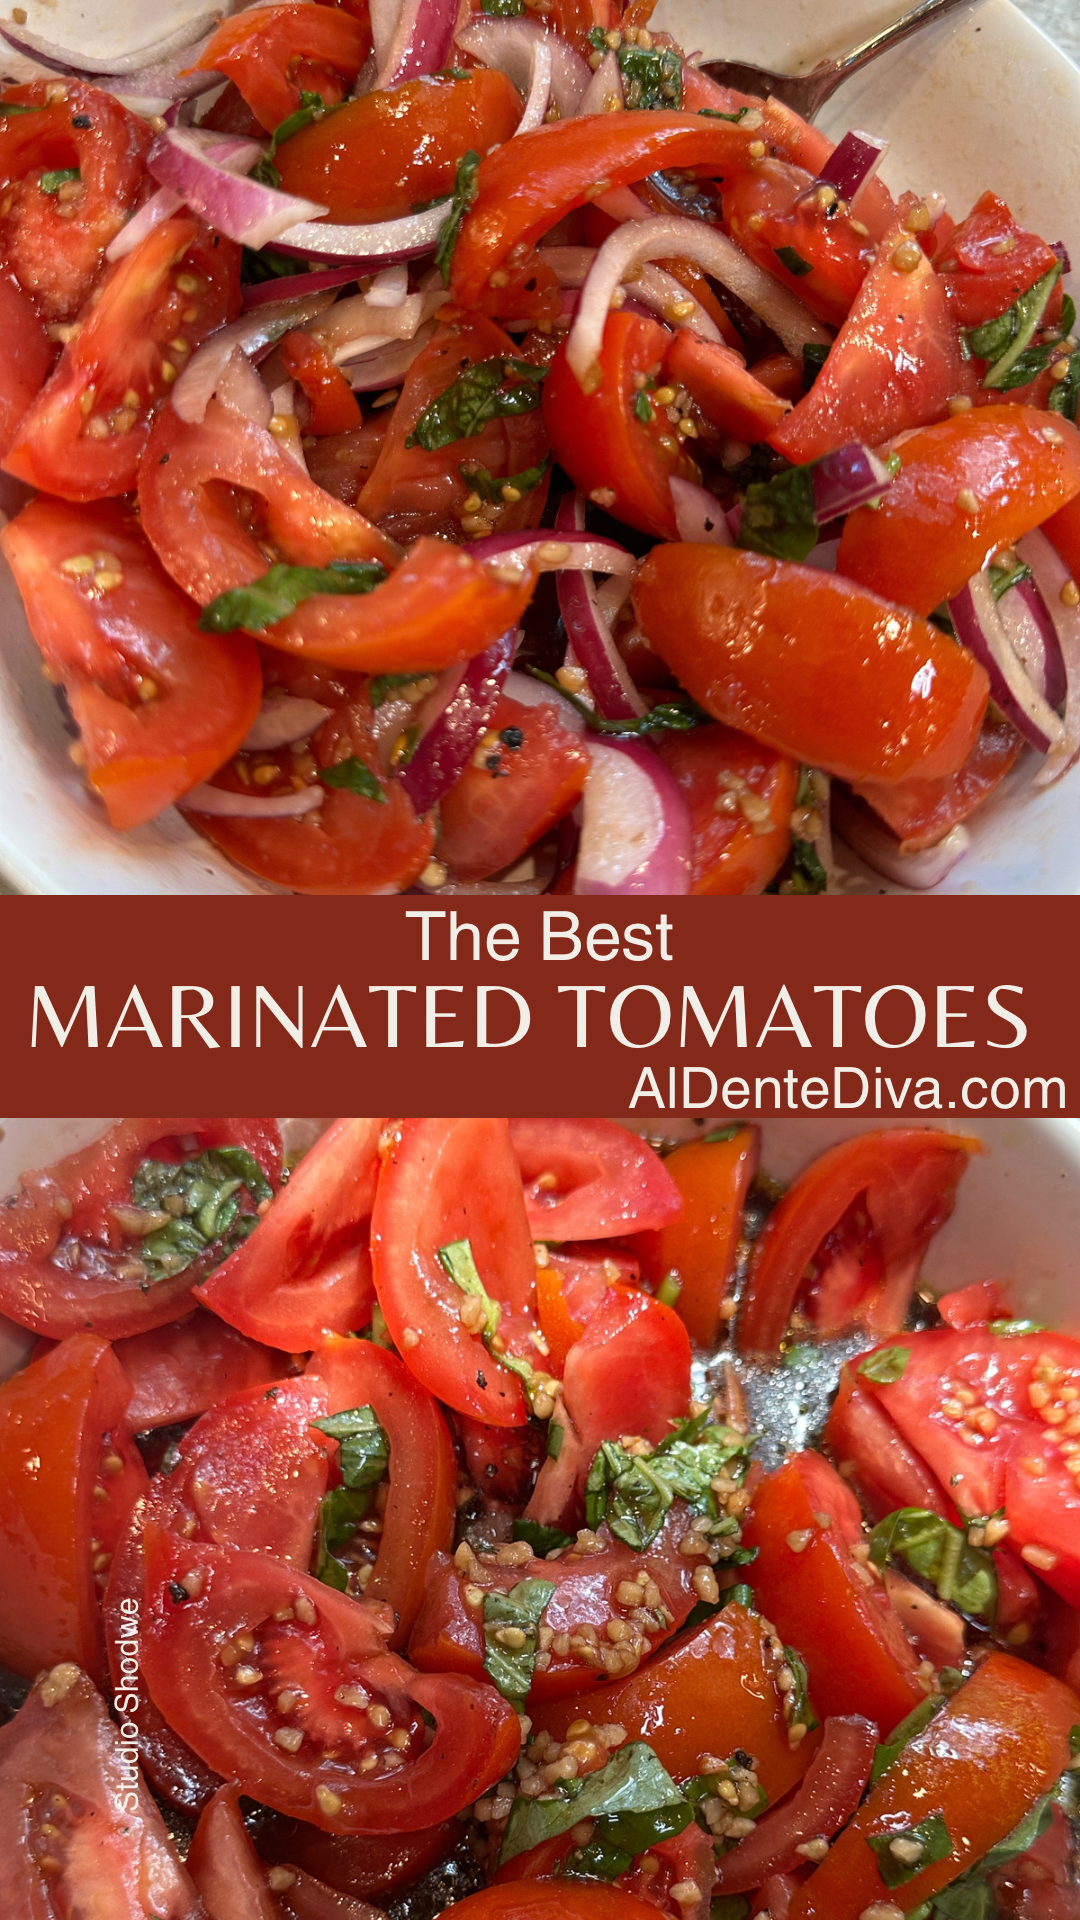 The Best Marinated Tomatoes